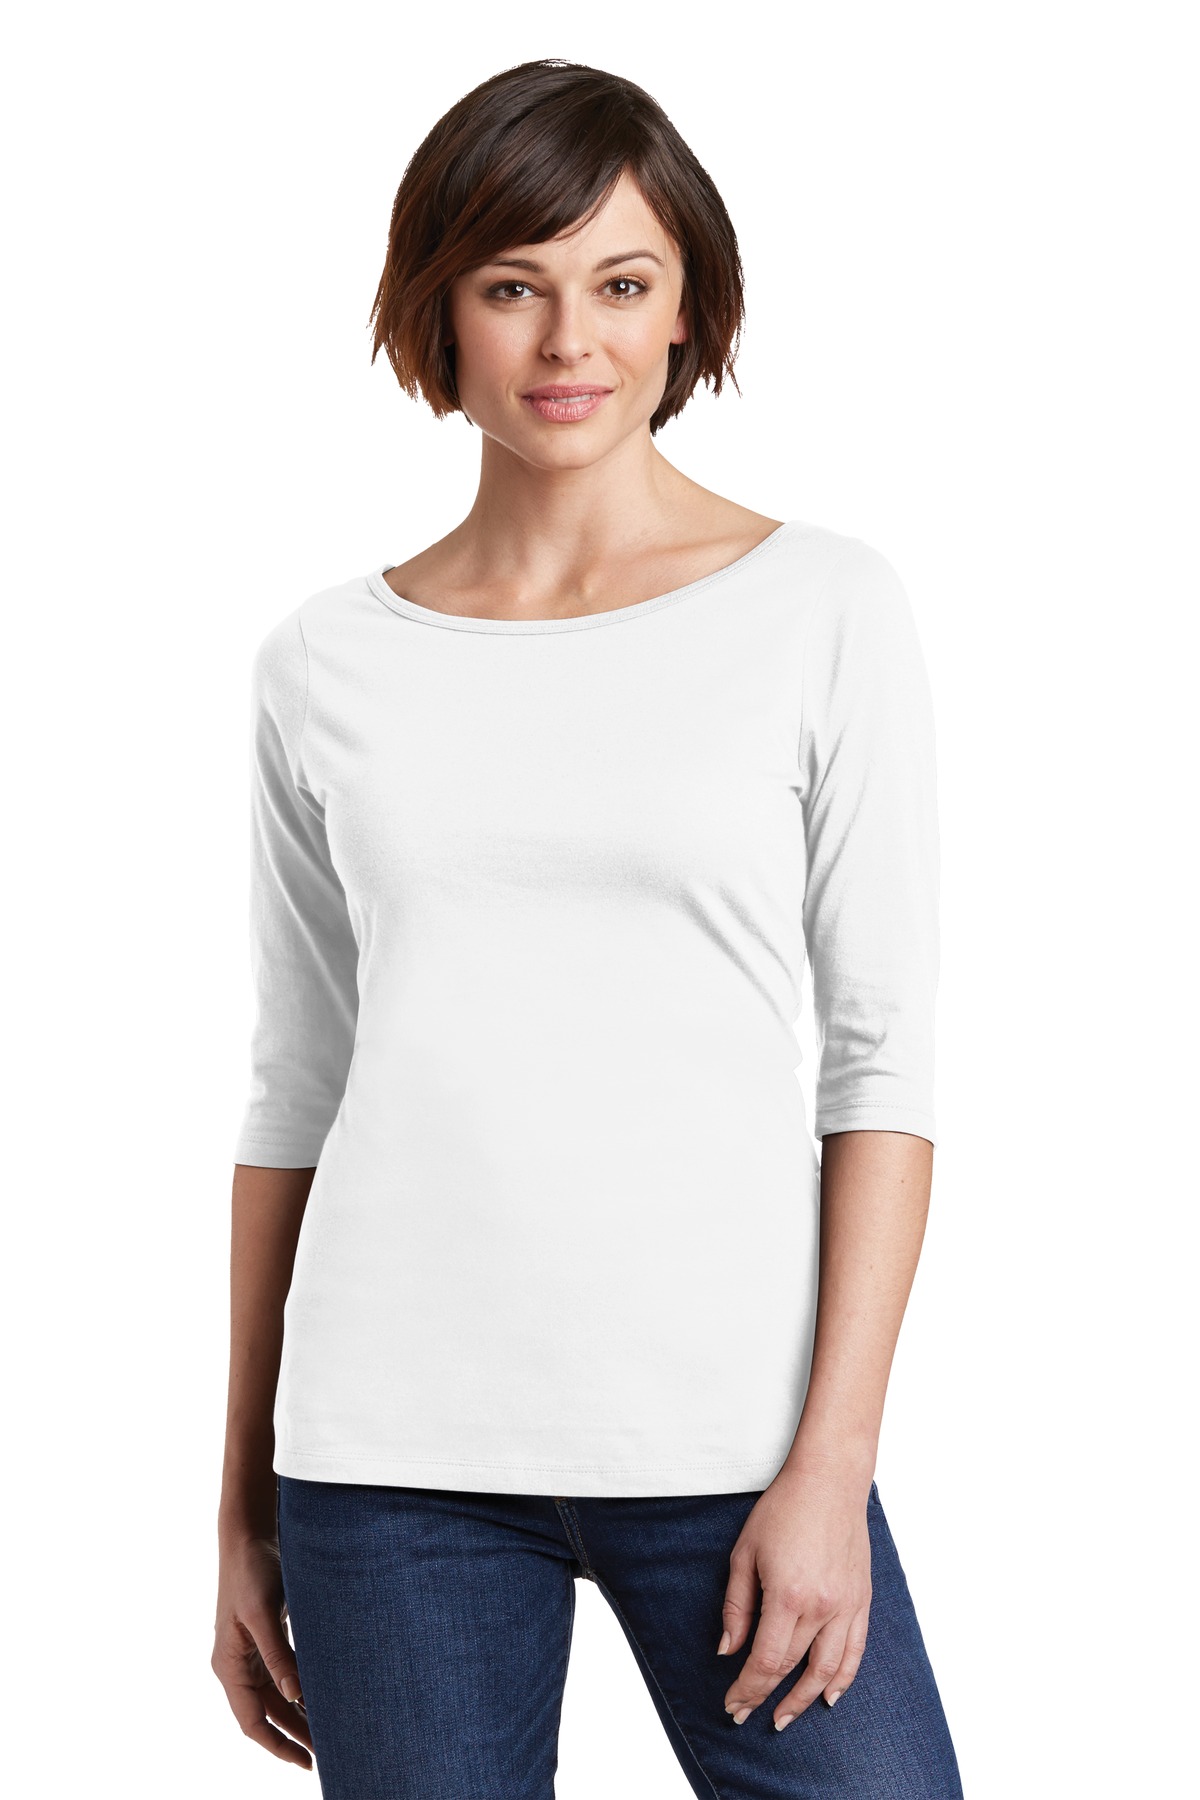 District Ladies Perfect Weight  DM107L - 3/4 Sleeve Tee